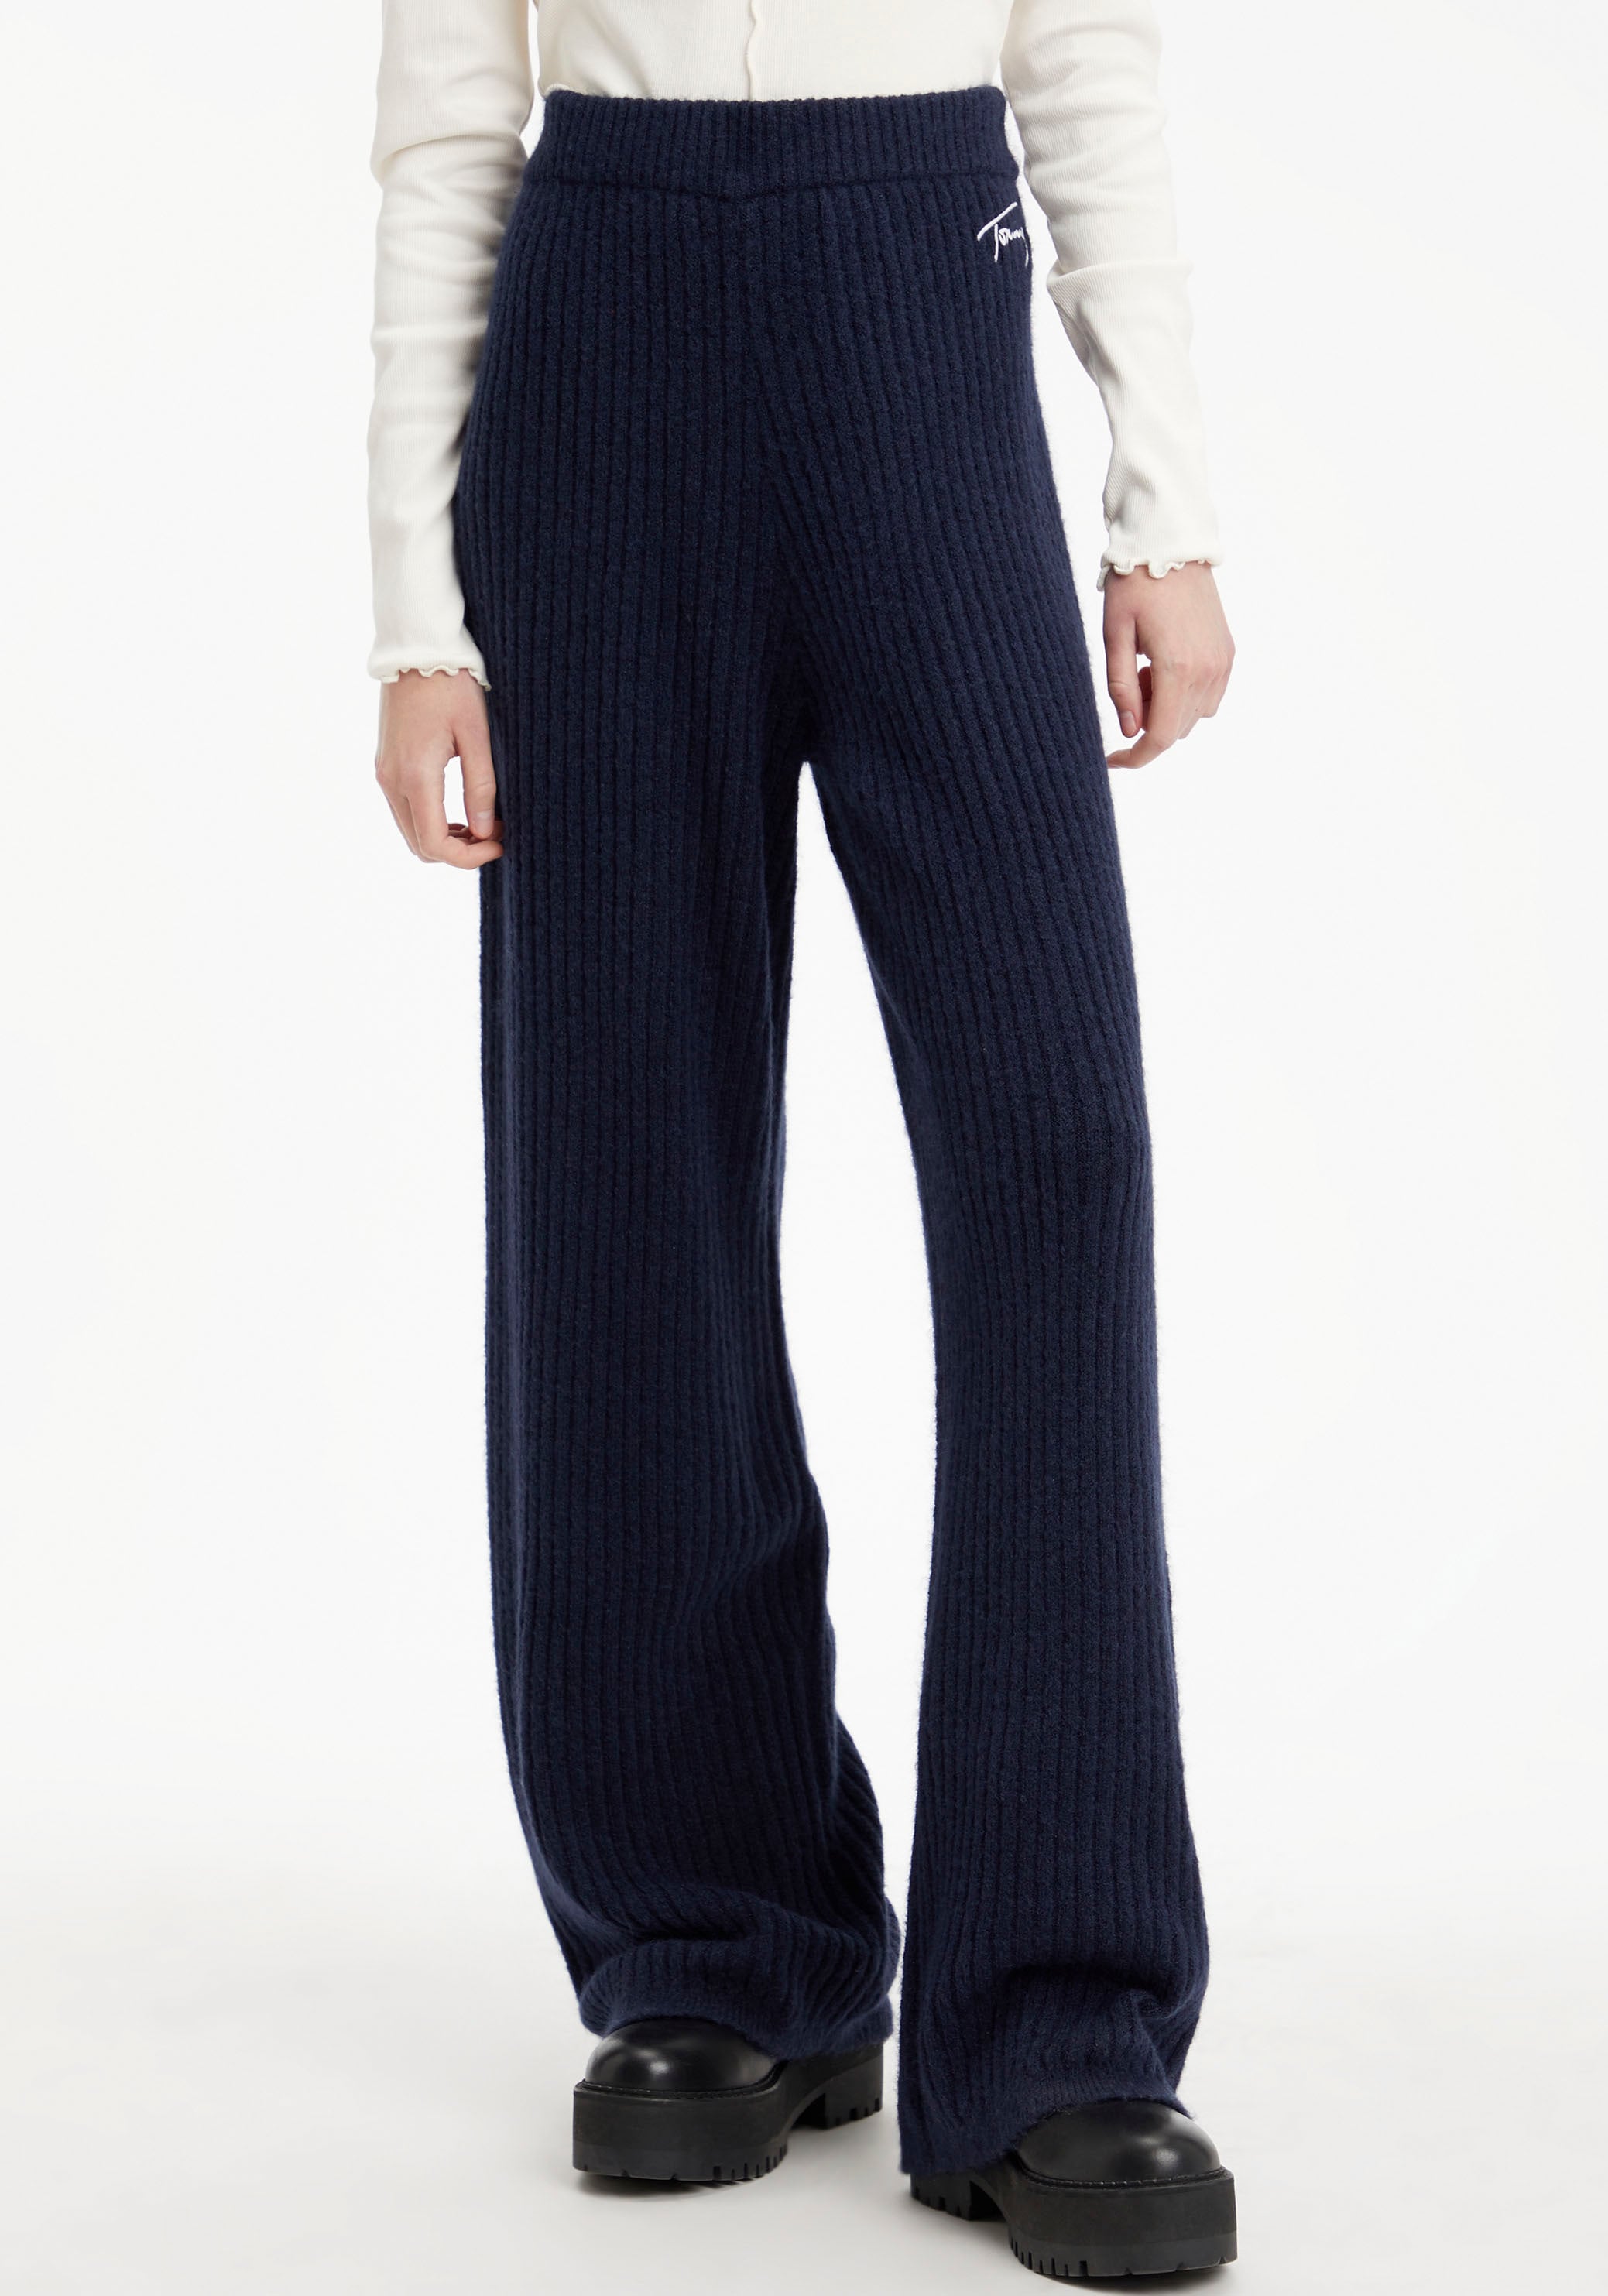 Jeans SIGNATURE mit Tommy & Logo-Flag Jeans COSY Tommy SWEATER Loungehose »TJW in online PANT«, Rippoptik bestellen